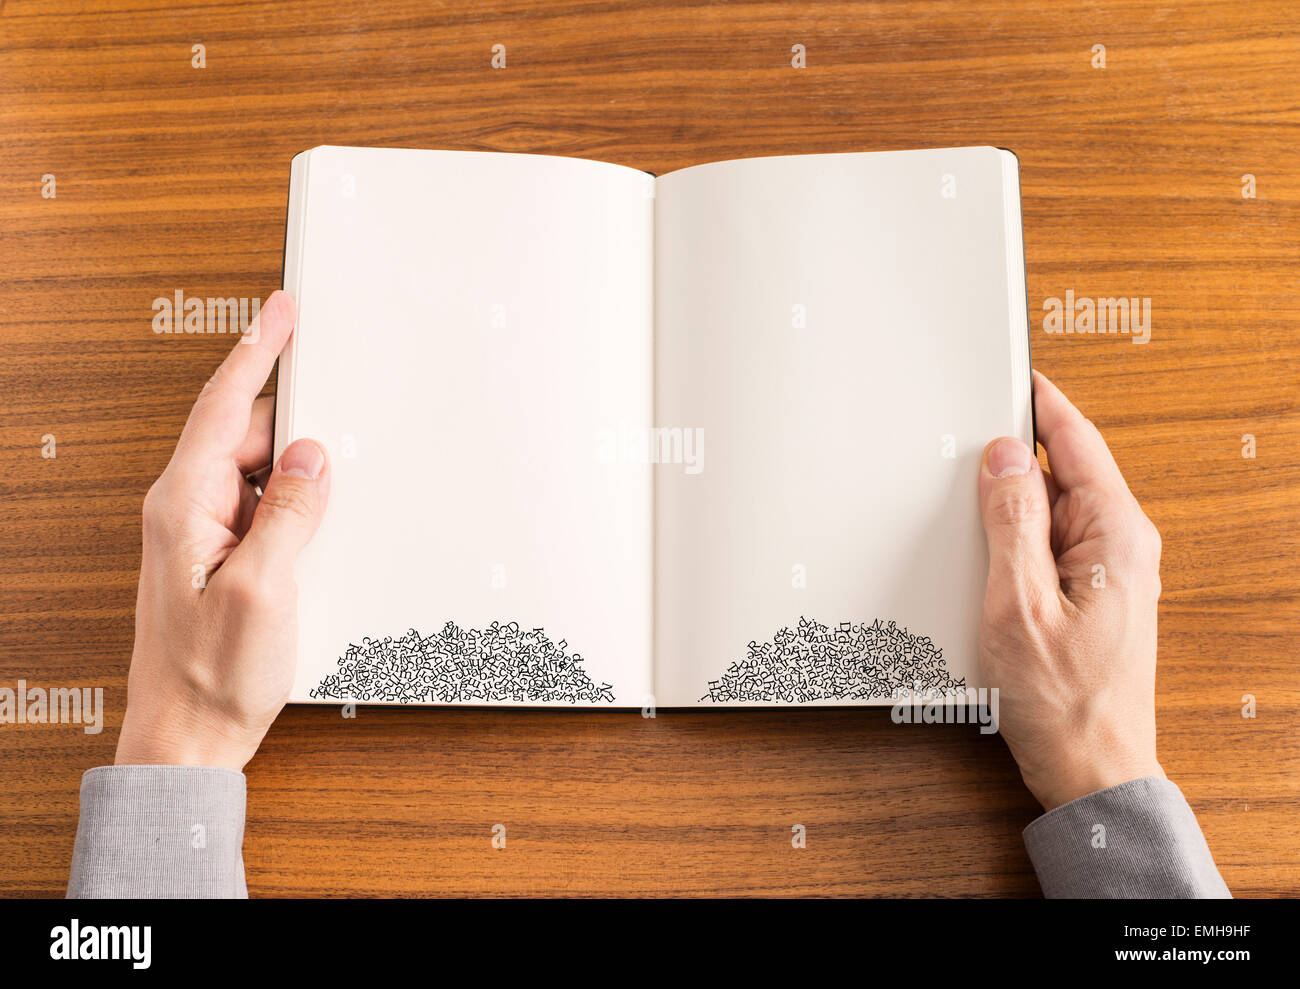 Hands of man holding book. The text on the pages have fallen and are stacked on the bottom of the pages. Conceptual image of difficulty with reading and spelling. Stock Photo